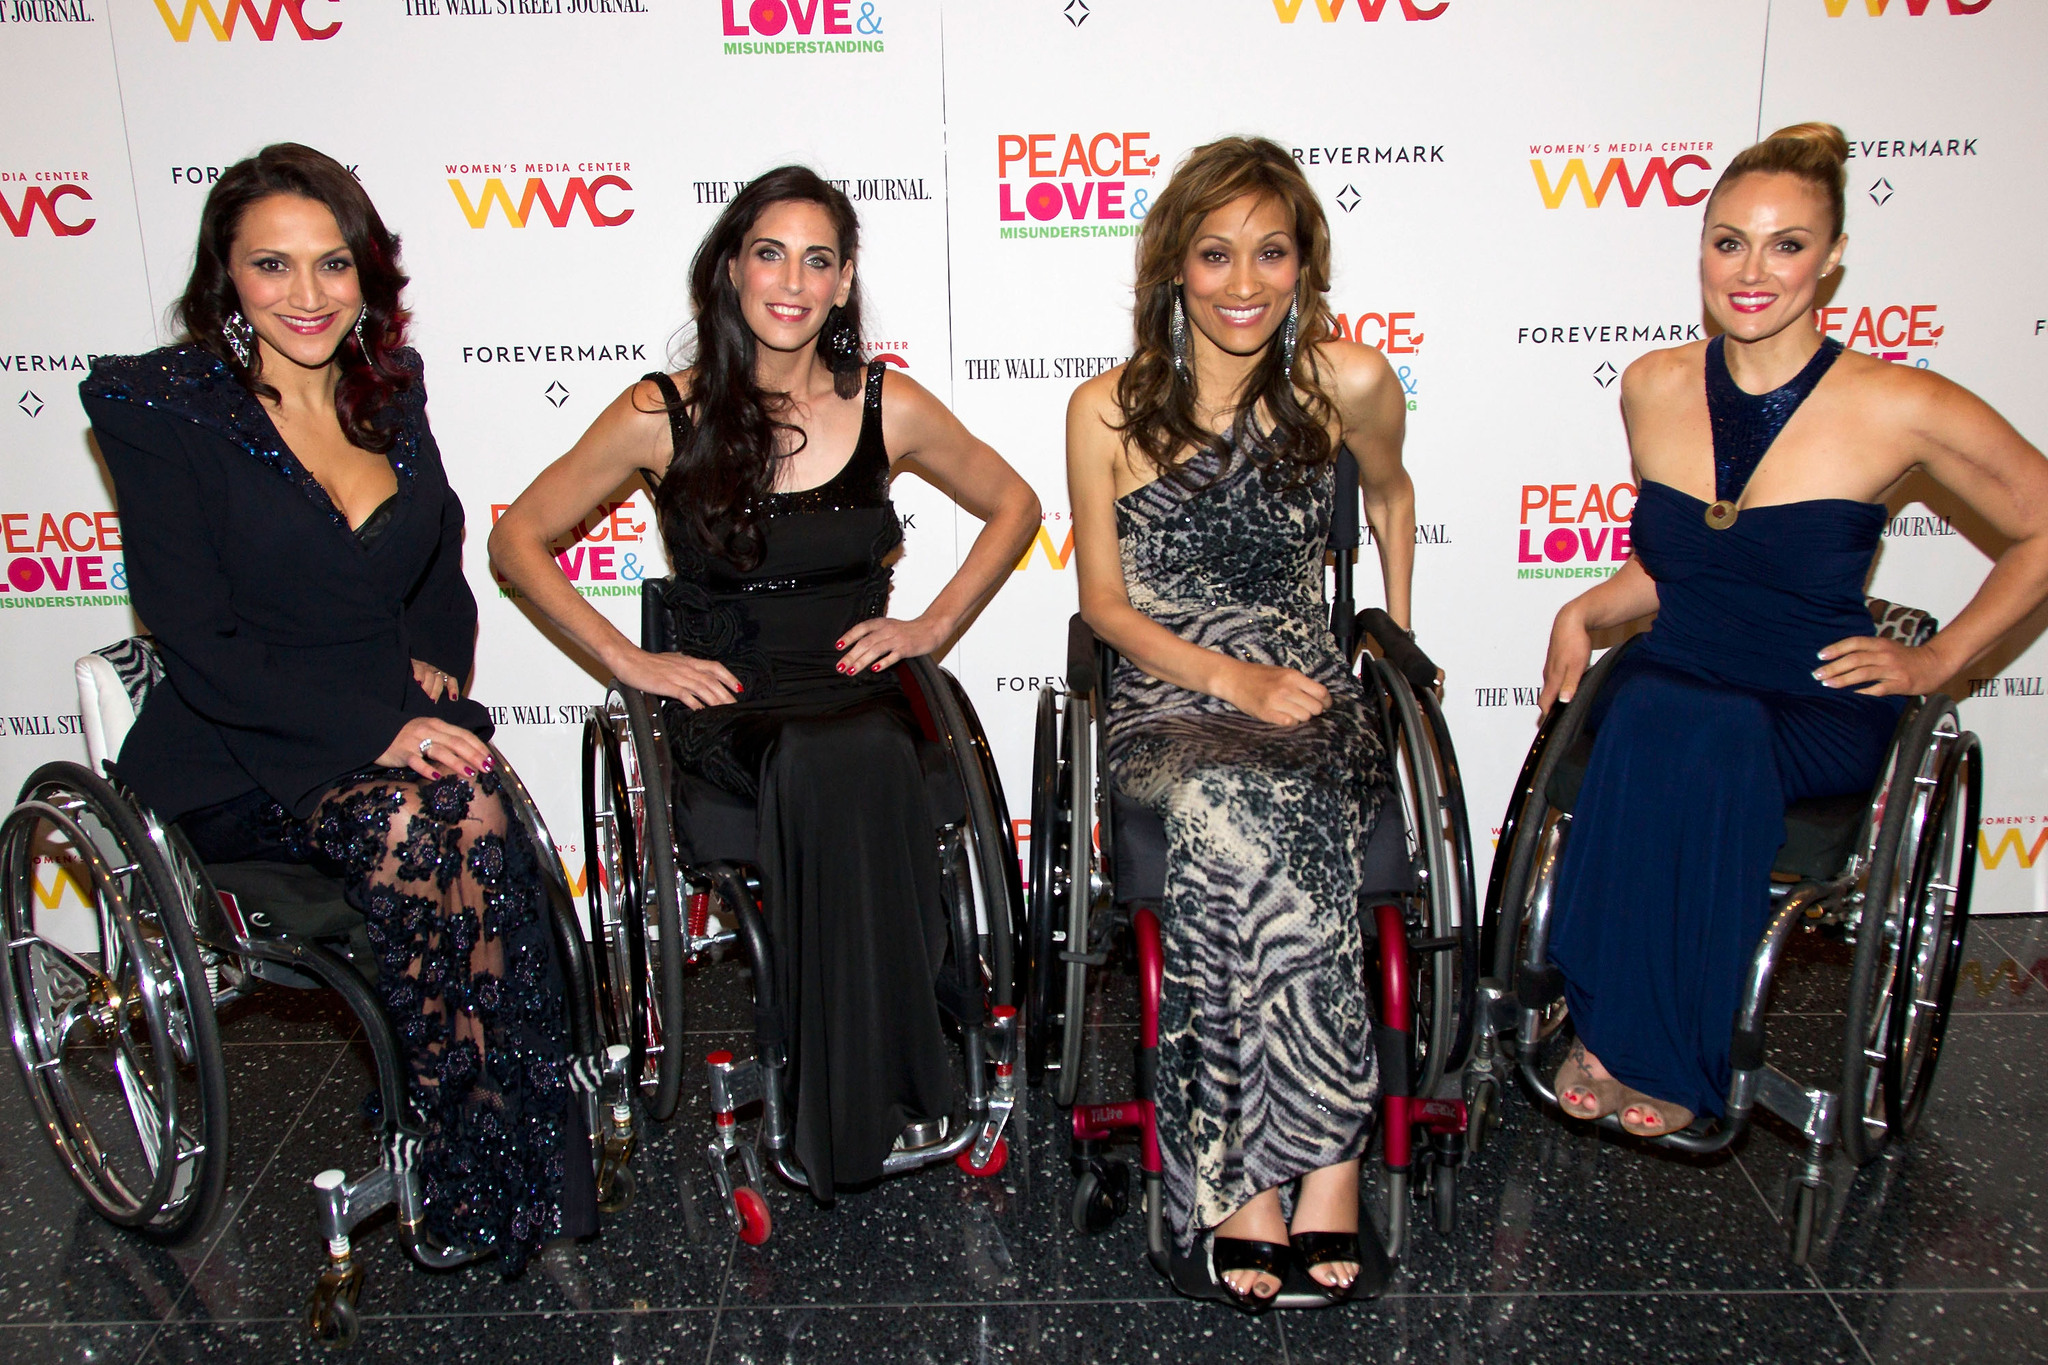 Ry Russo-Young, Mia Schaikewitz, Auti Angel, Angela Rockwood and Tiphany Adams at event of Peace, Love, & Misunderstanding (2011)